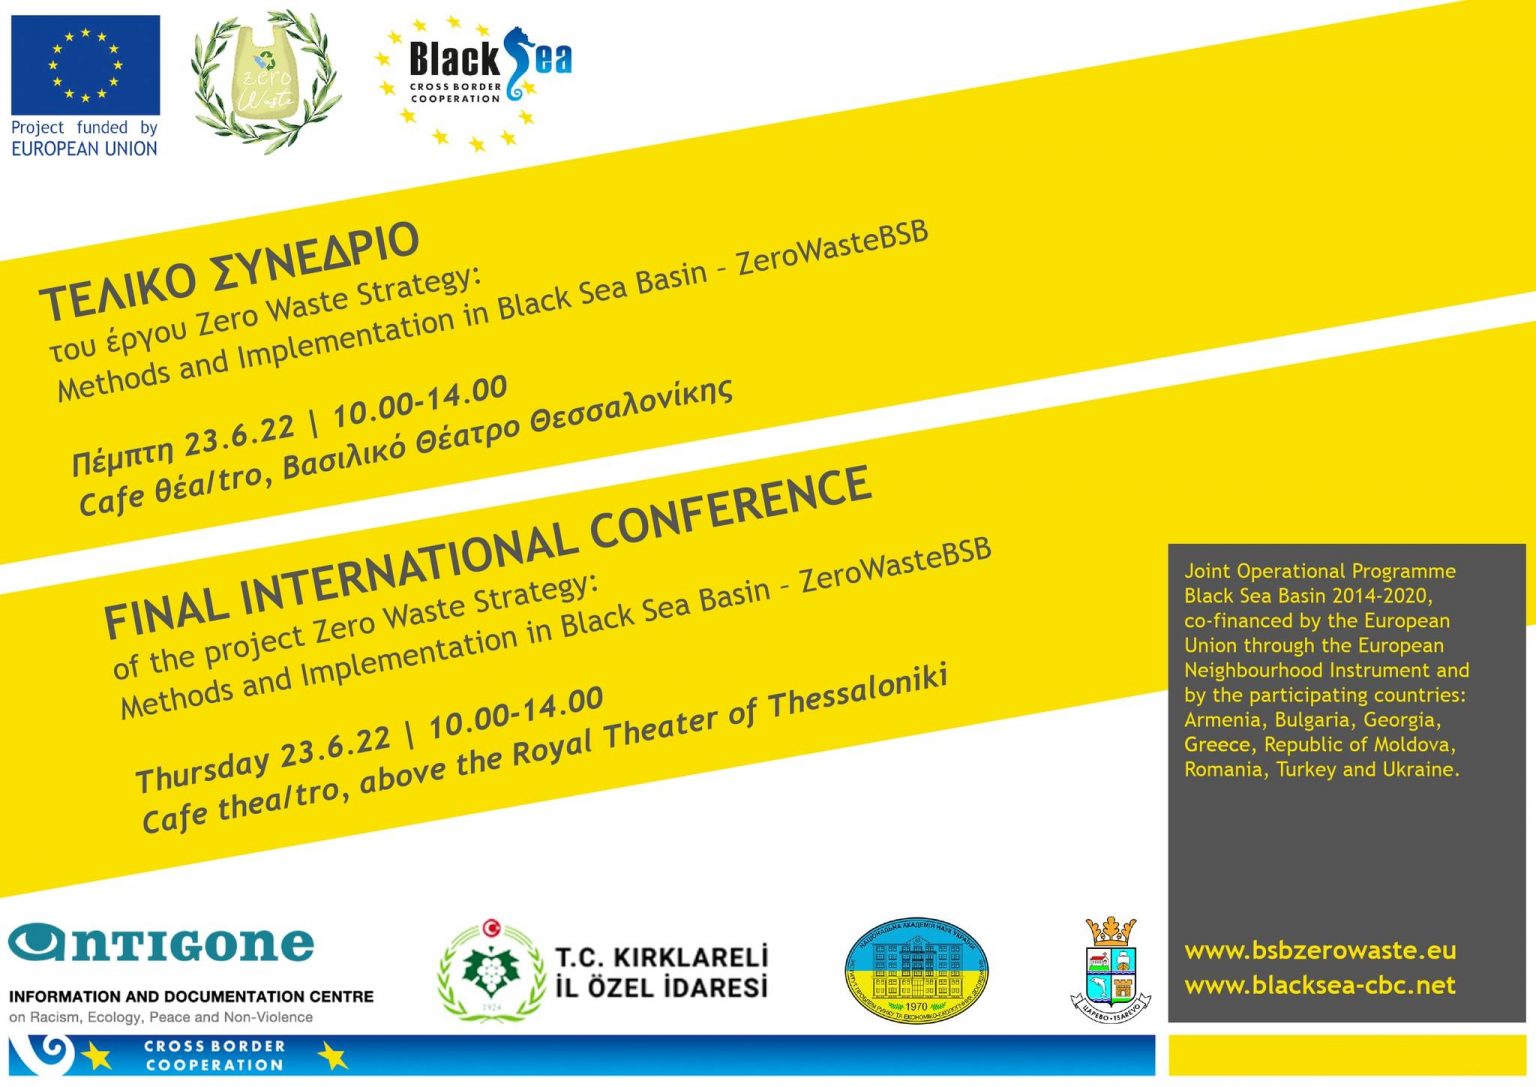 Final Conference of the project “Zero Waste Strategy: Methods and Implementation in Black Sea Basin”